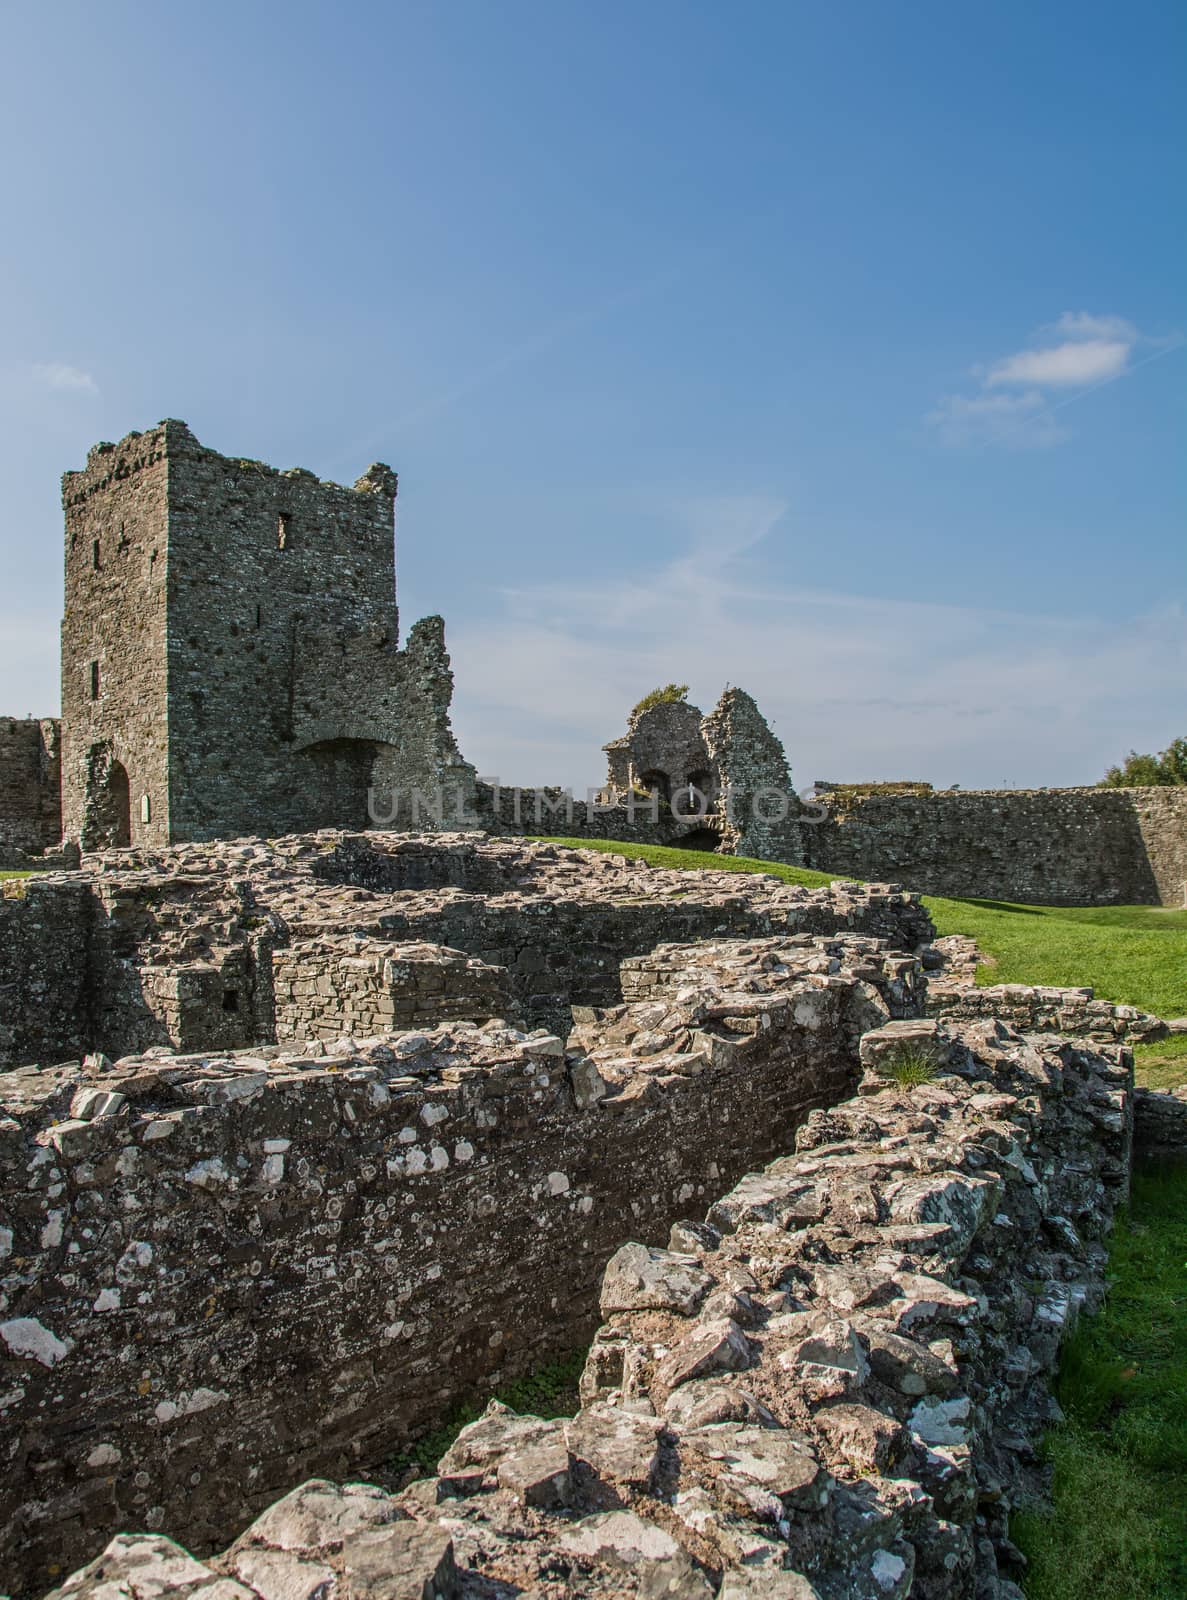 A ruined castle, in South West Wales